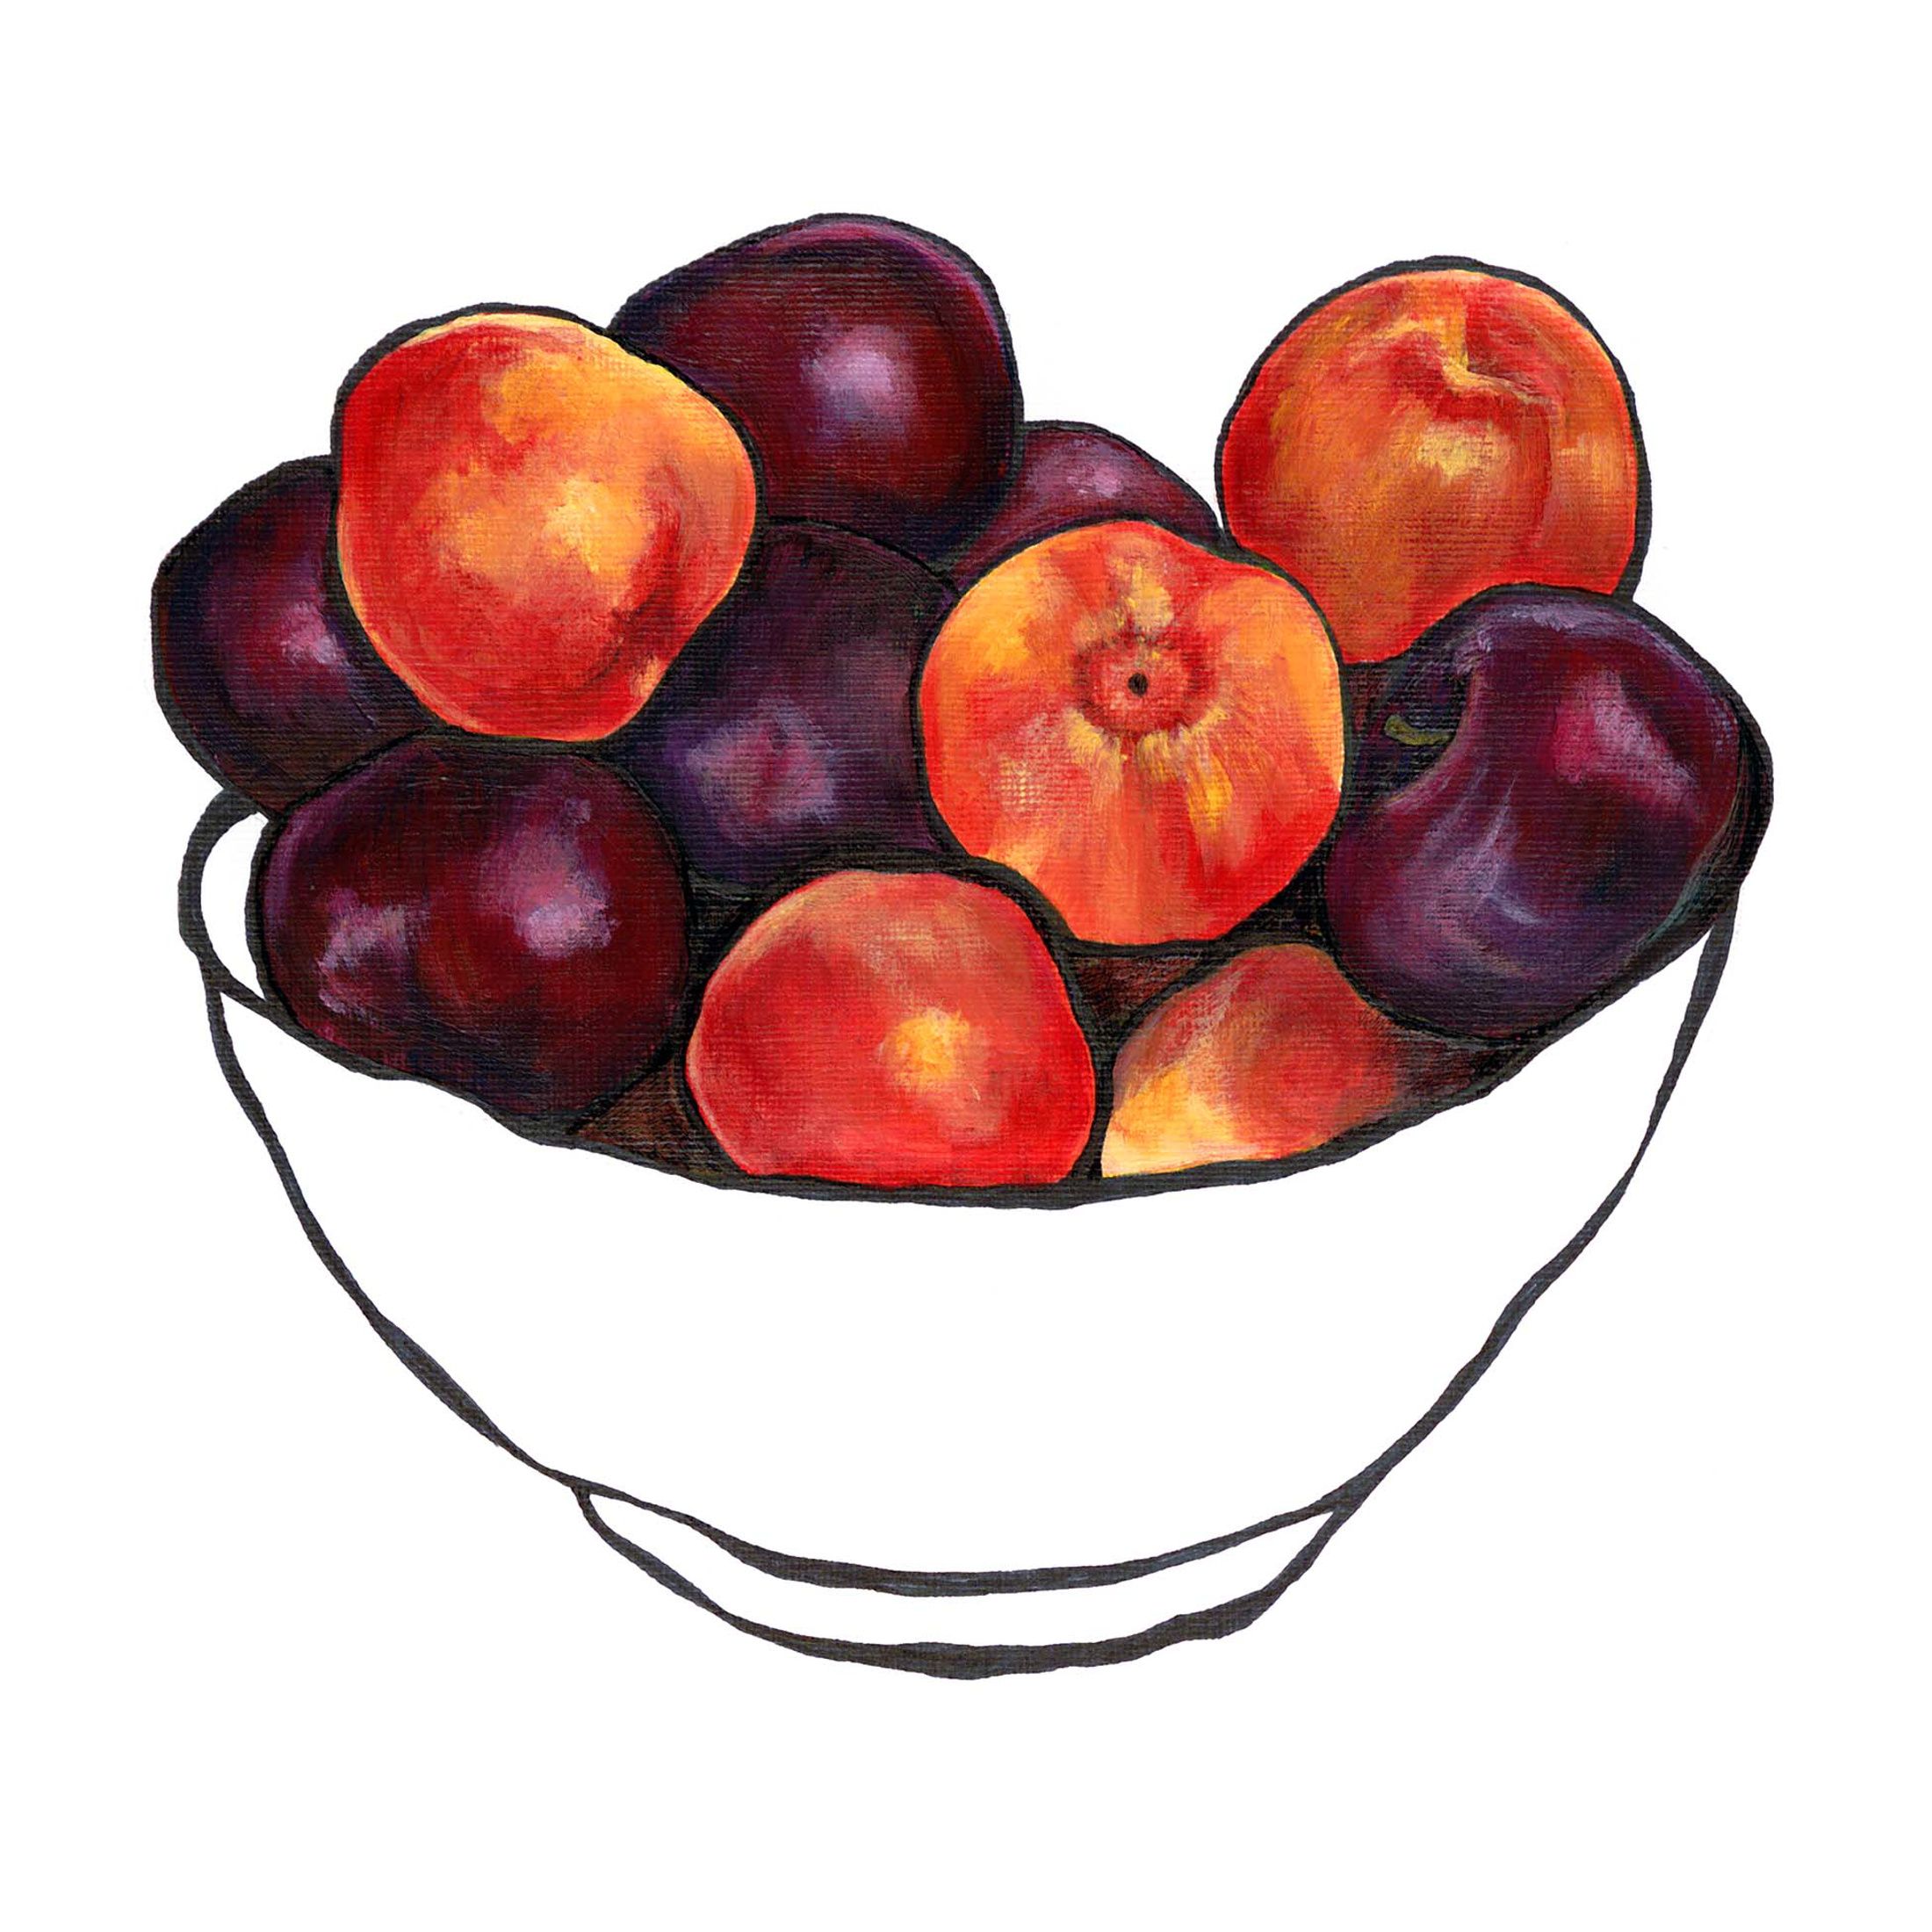 Summer Plums by Lucy Routh